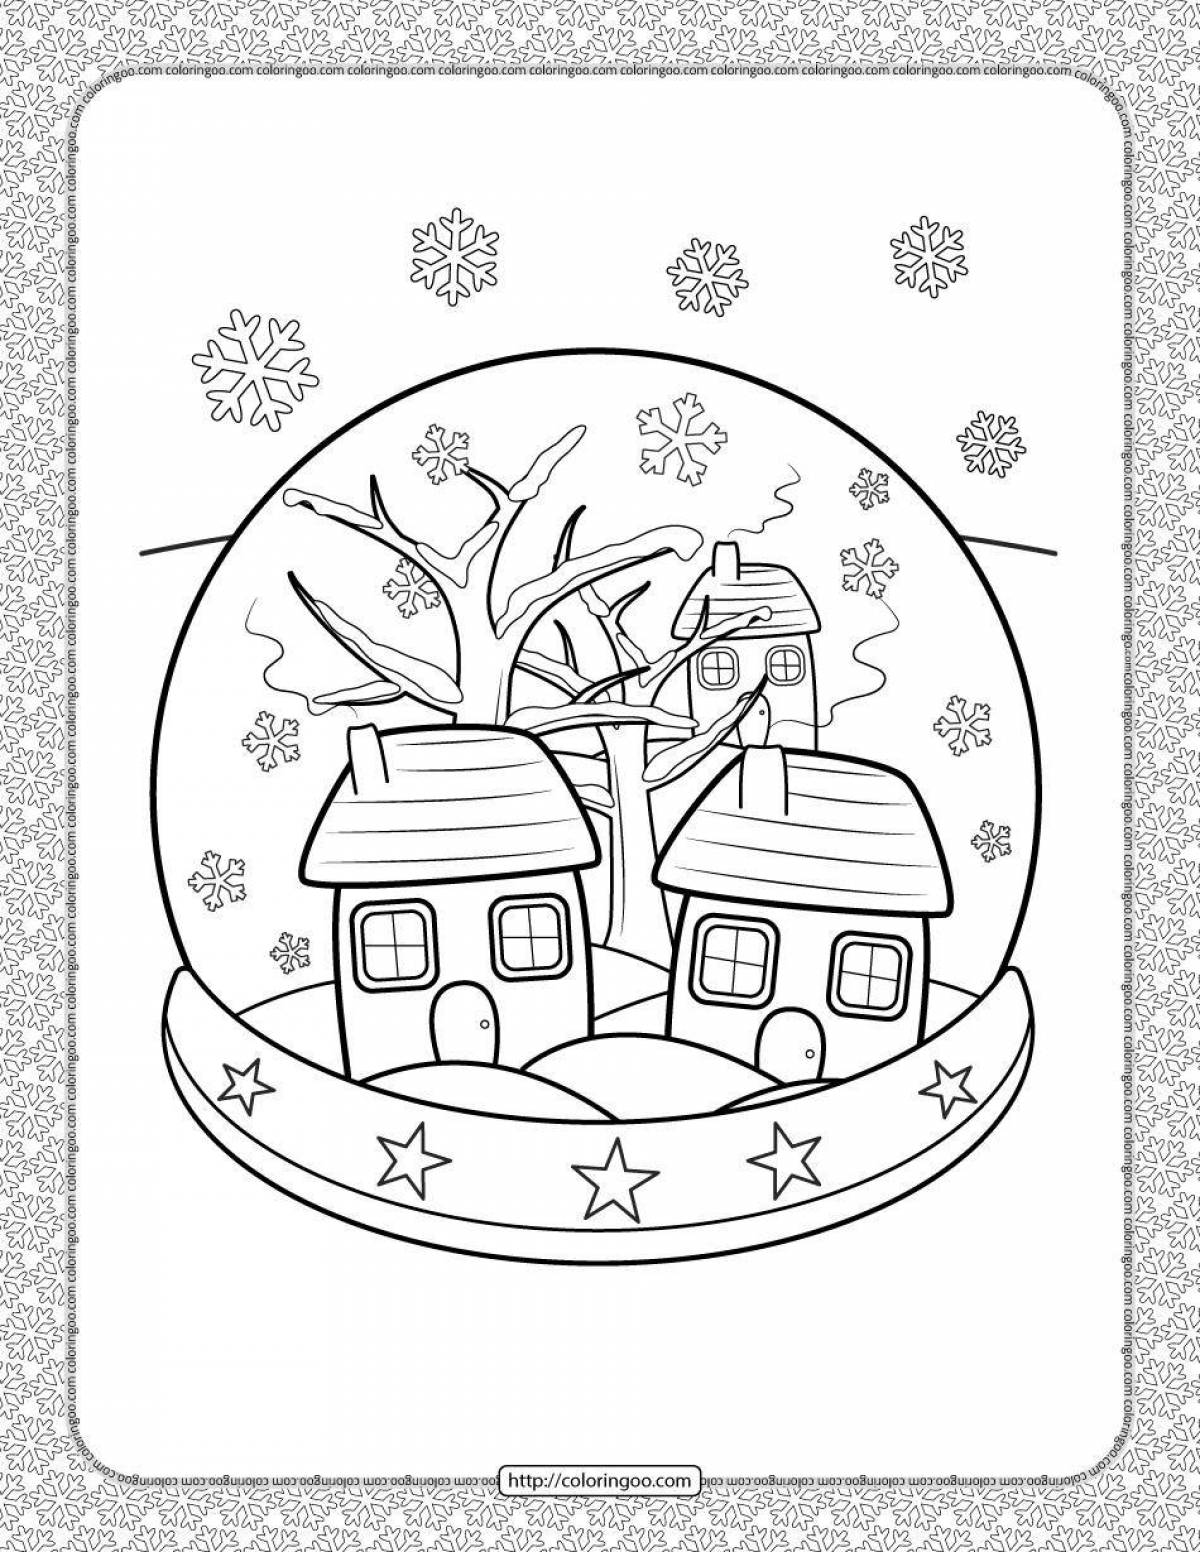 Coloring book glowing winter town for kids